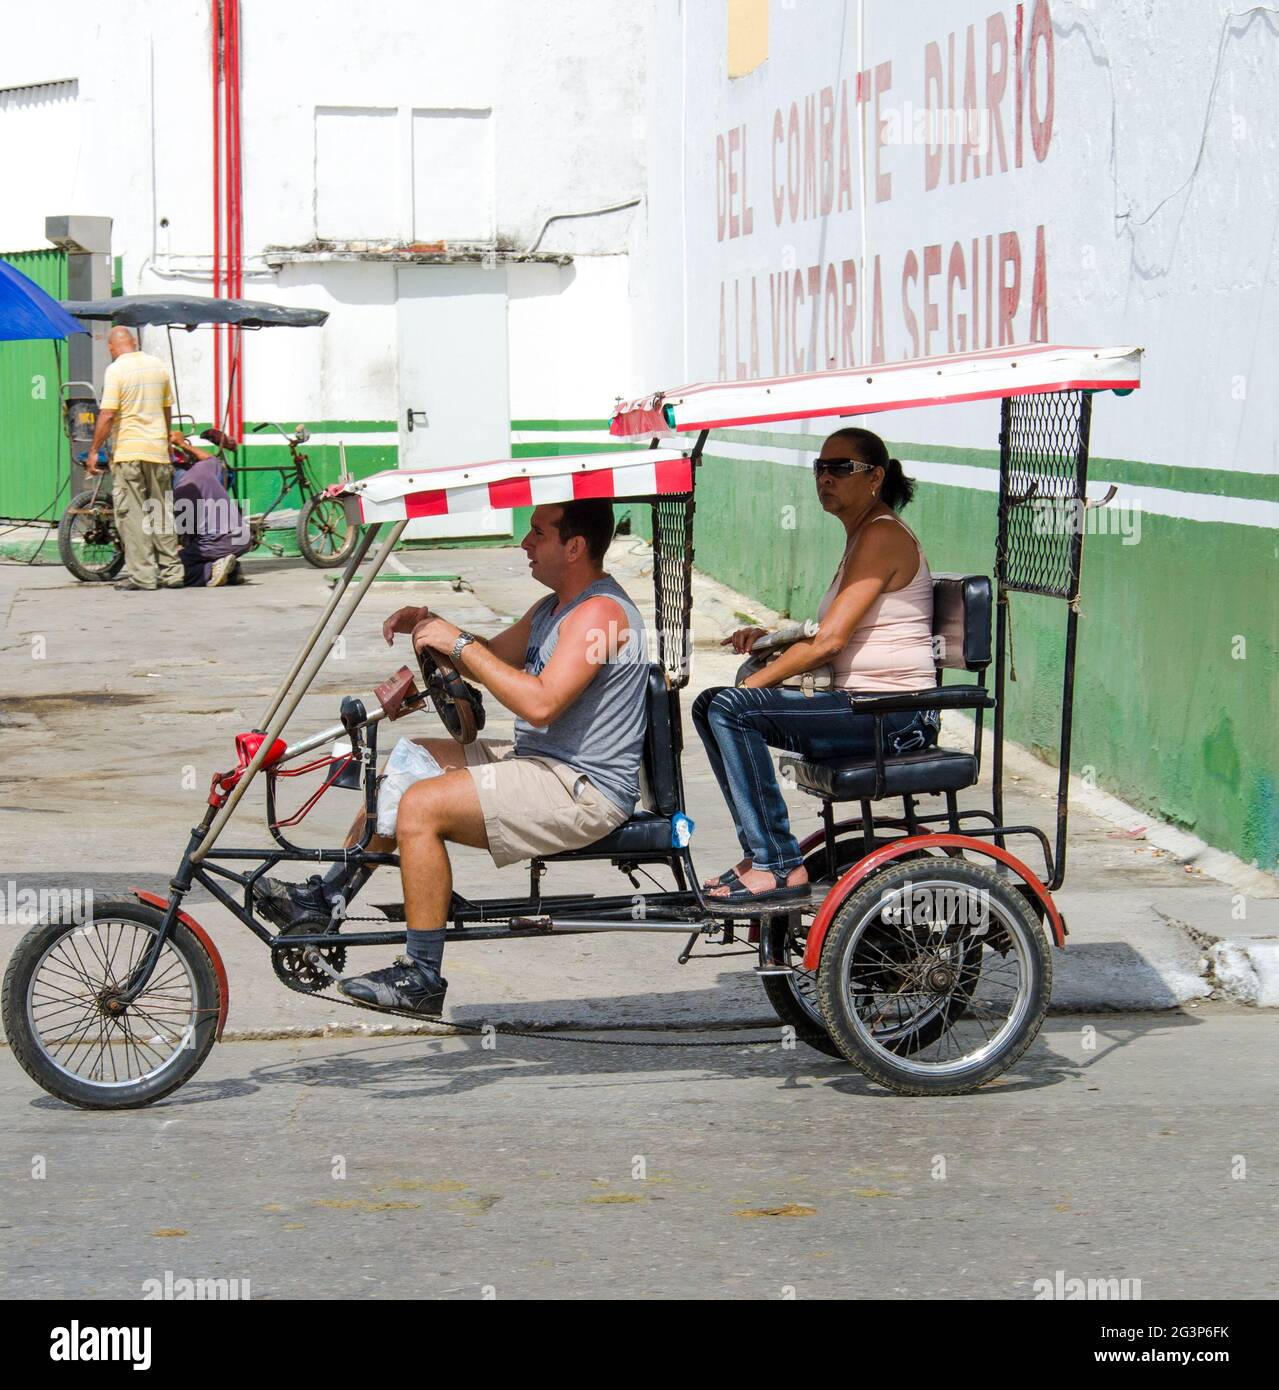 Two people ride a  bici taxi or bicitaxi in a Cuban street.  The man is pedaling the cart underits red striped awning, wearing a gray tank top, khaki Stock Photo